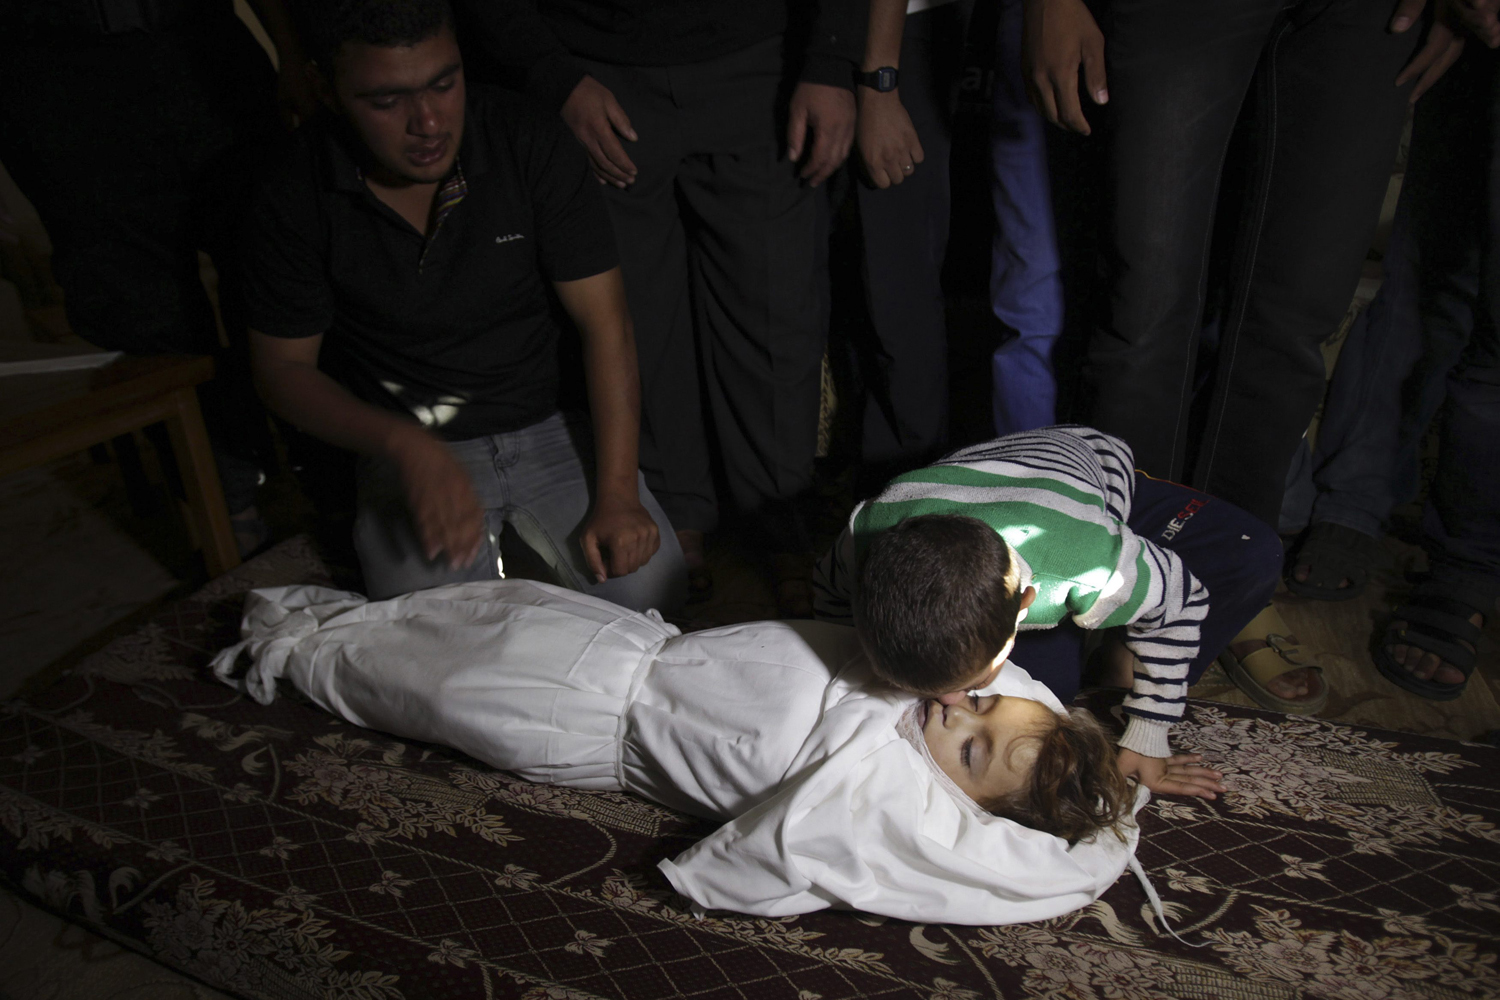 Image: Nov. 15, 2012. The brother of Palestinian boy Walid al-Abadlah, who according to hospital officials was killed in an Israeli air strike, kisses his body during his funeral in Khan Younis in the southern Gaza Strip.